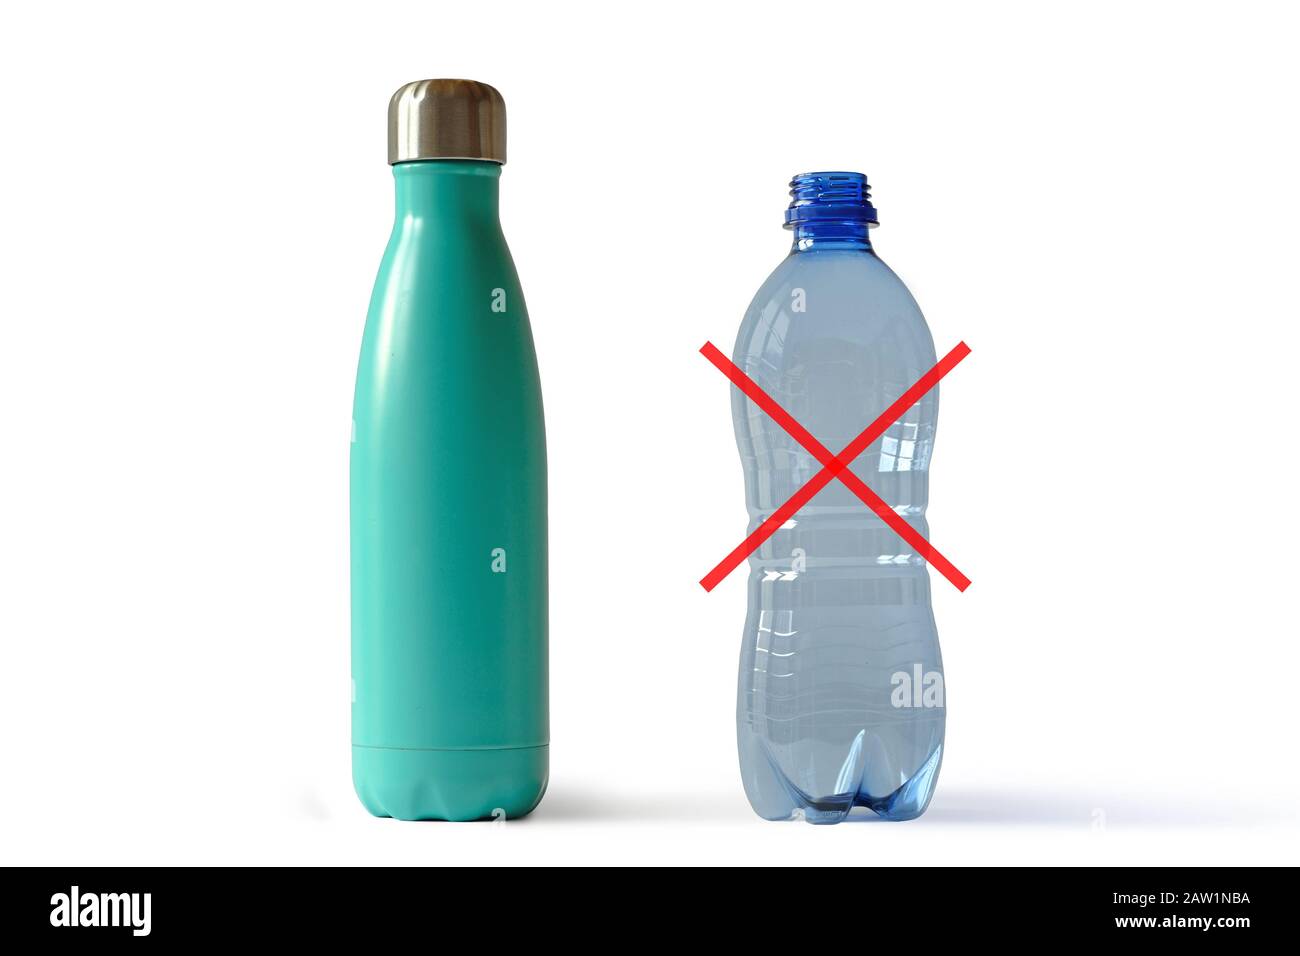 https://c8.alamy.com/comp/2AW1NBA/aluminium-stainless-thermo-bottle-and-plastic-water-bottle-with-x-mark-on-white-background-concept-of-ecology-and-stop-plastic-pollution-2AW1NBA.jpg